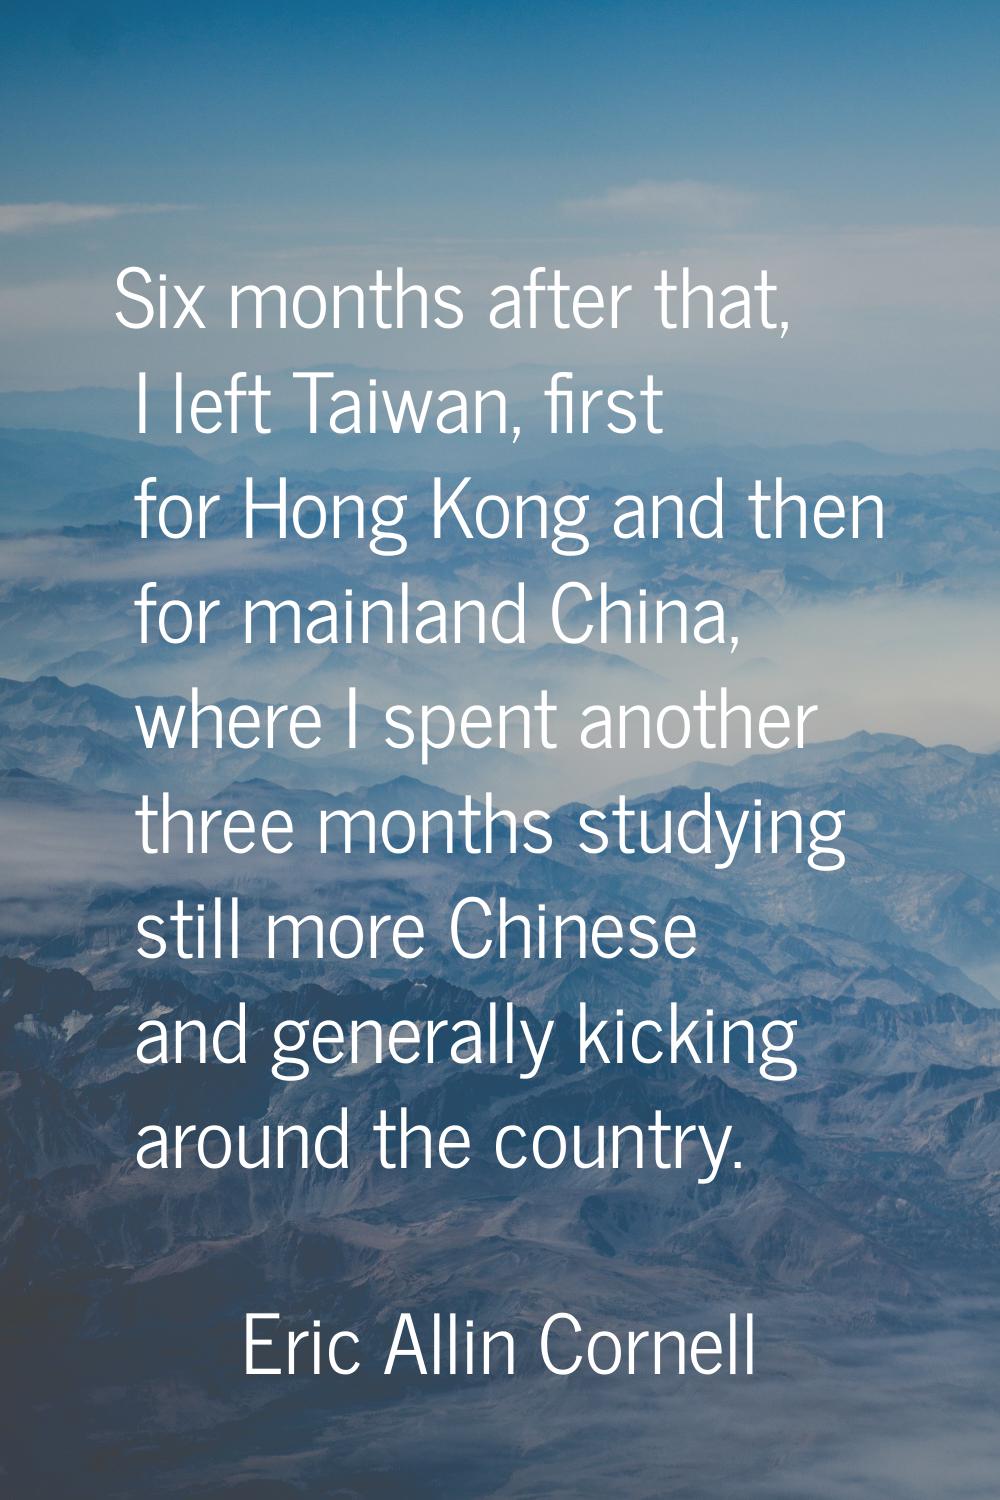 Six months after that, I left Taiwan, first for Hong Kong and then for mainland China, where I spen